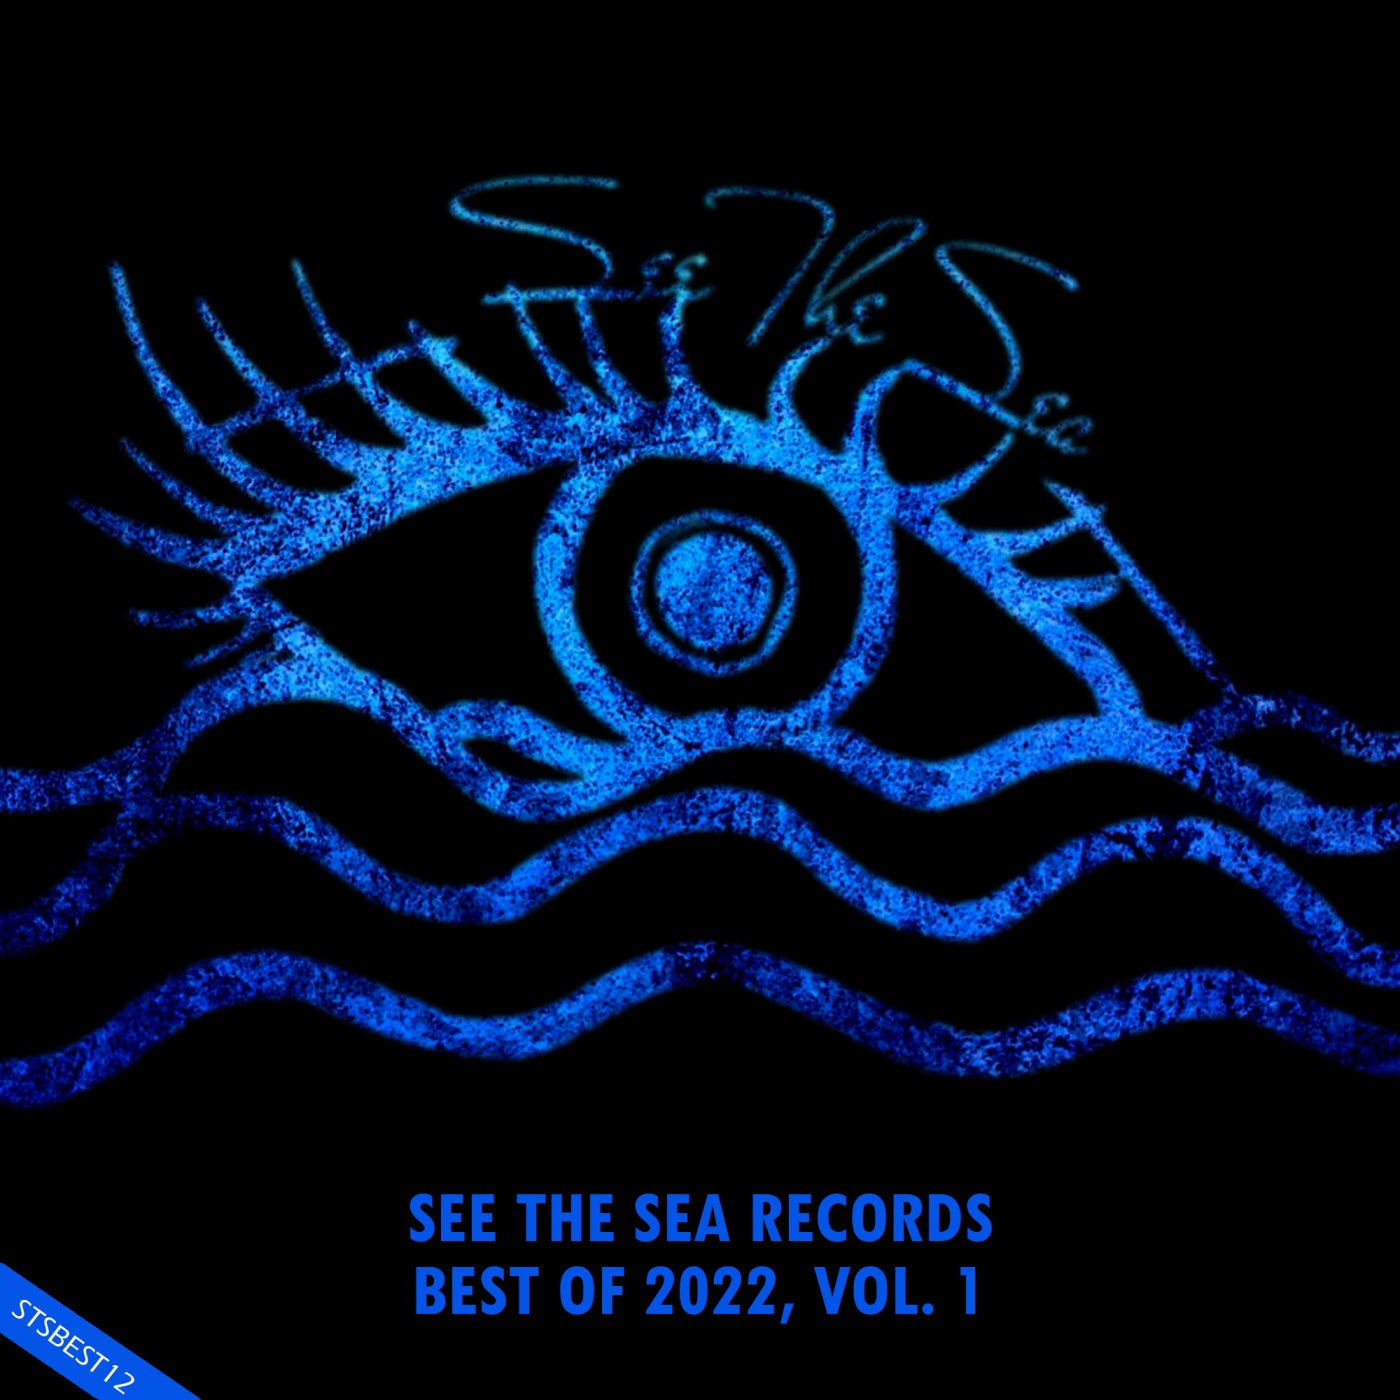 See The Sea Records: Best Of 2022, Vol. 1